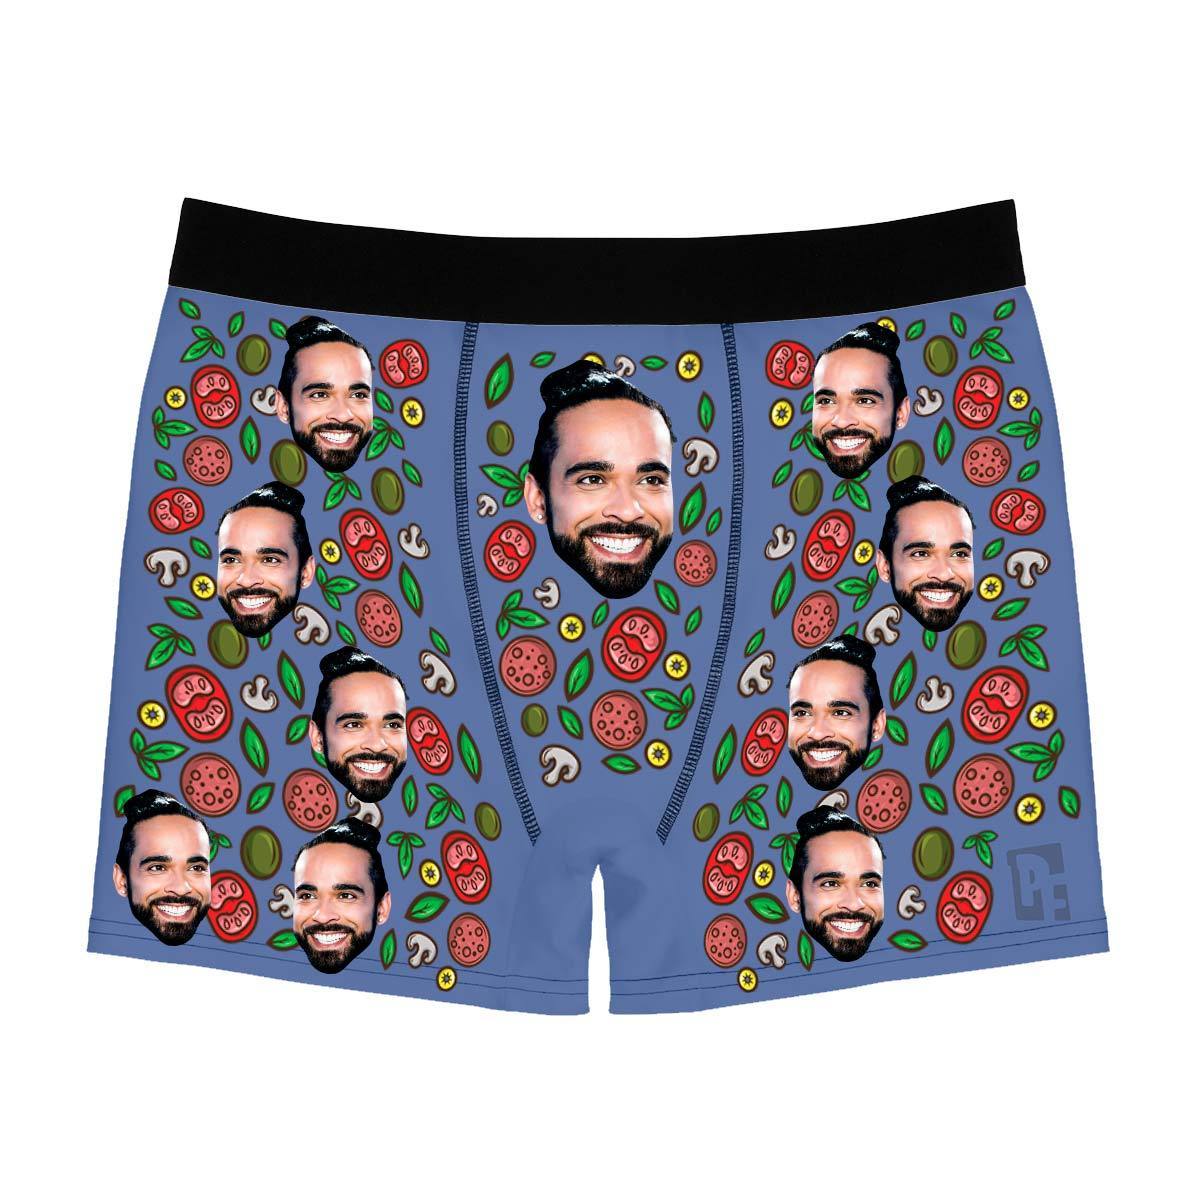 Darkblue Pizza men's boxer briefs personalized with photo printed on them